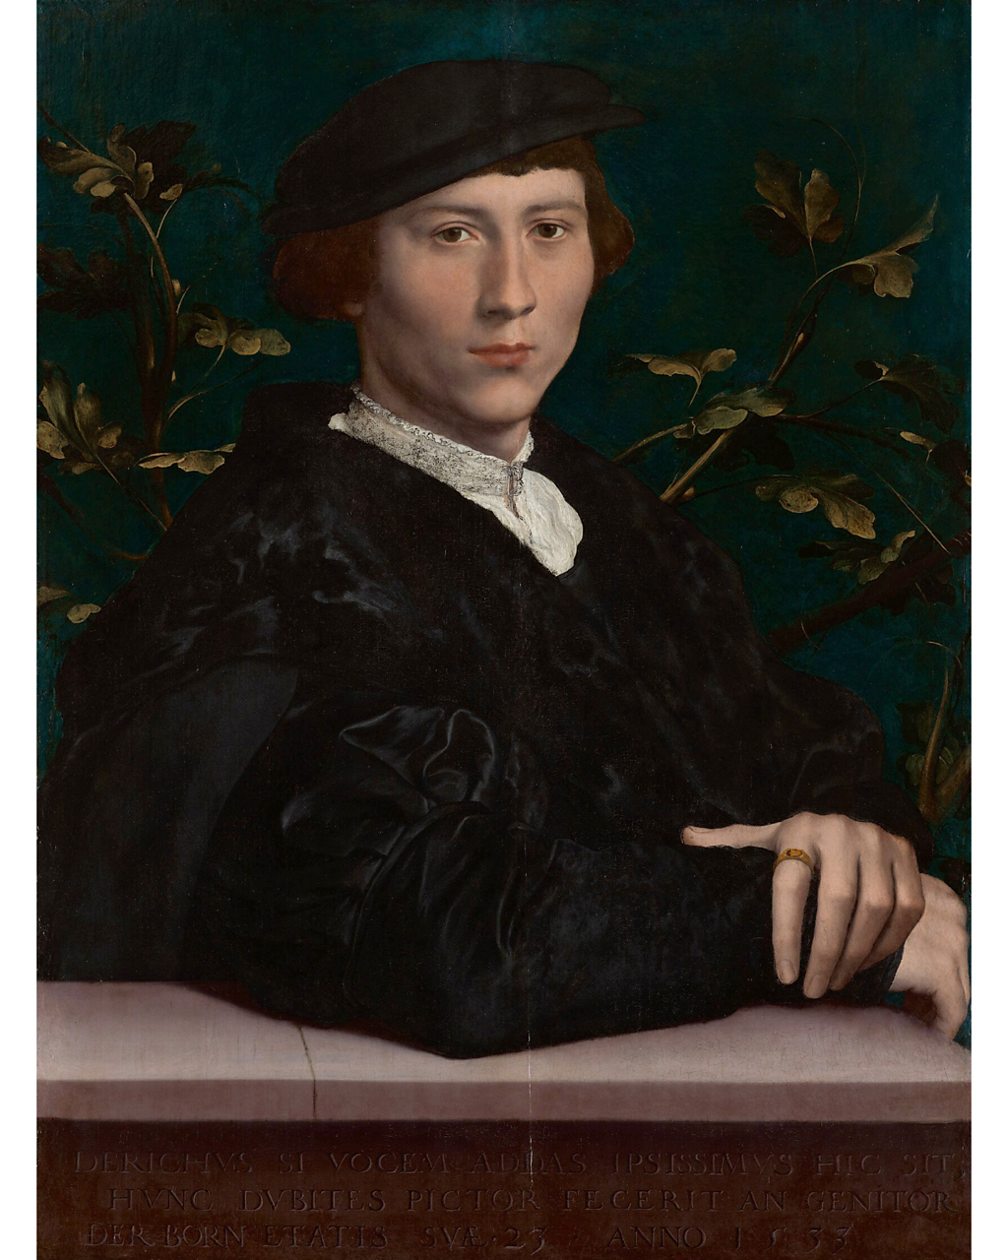 Royal Collection Trust / His Majesty King Charles III Portrait of Derich Born (1533) by Hans Holbein the Younger (Credit: Royal Collection Trust / His Majesty King Charles III)